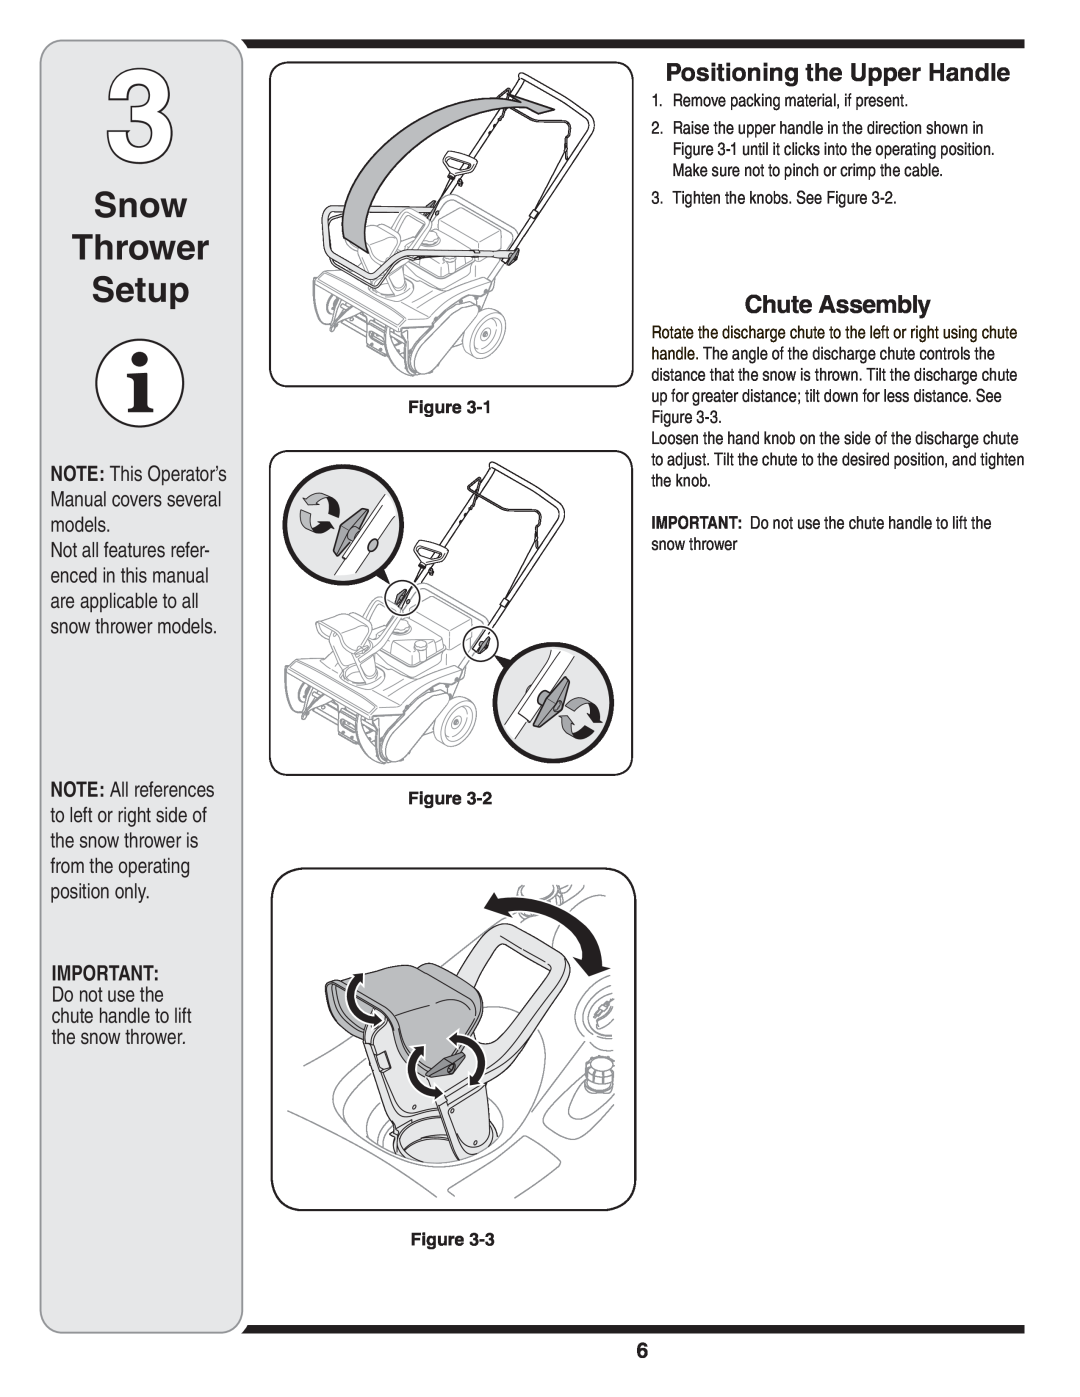 MTD 2N1 warranty Snow Thrower Setup, Positioning the Upper Handle, Chute Assembly, Figure Figure Figure 